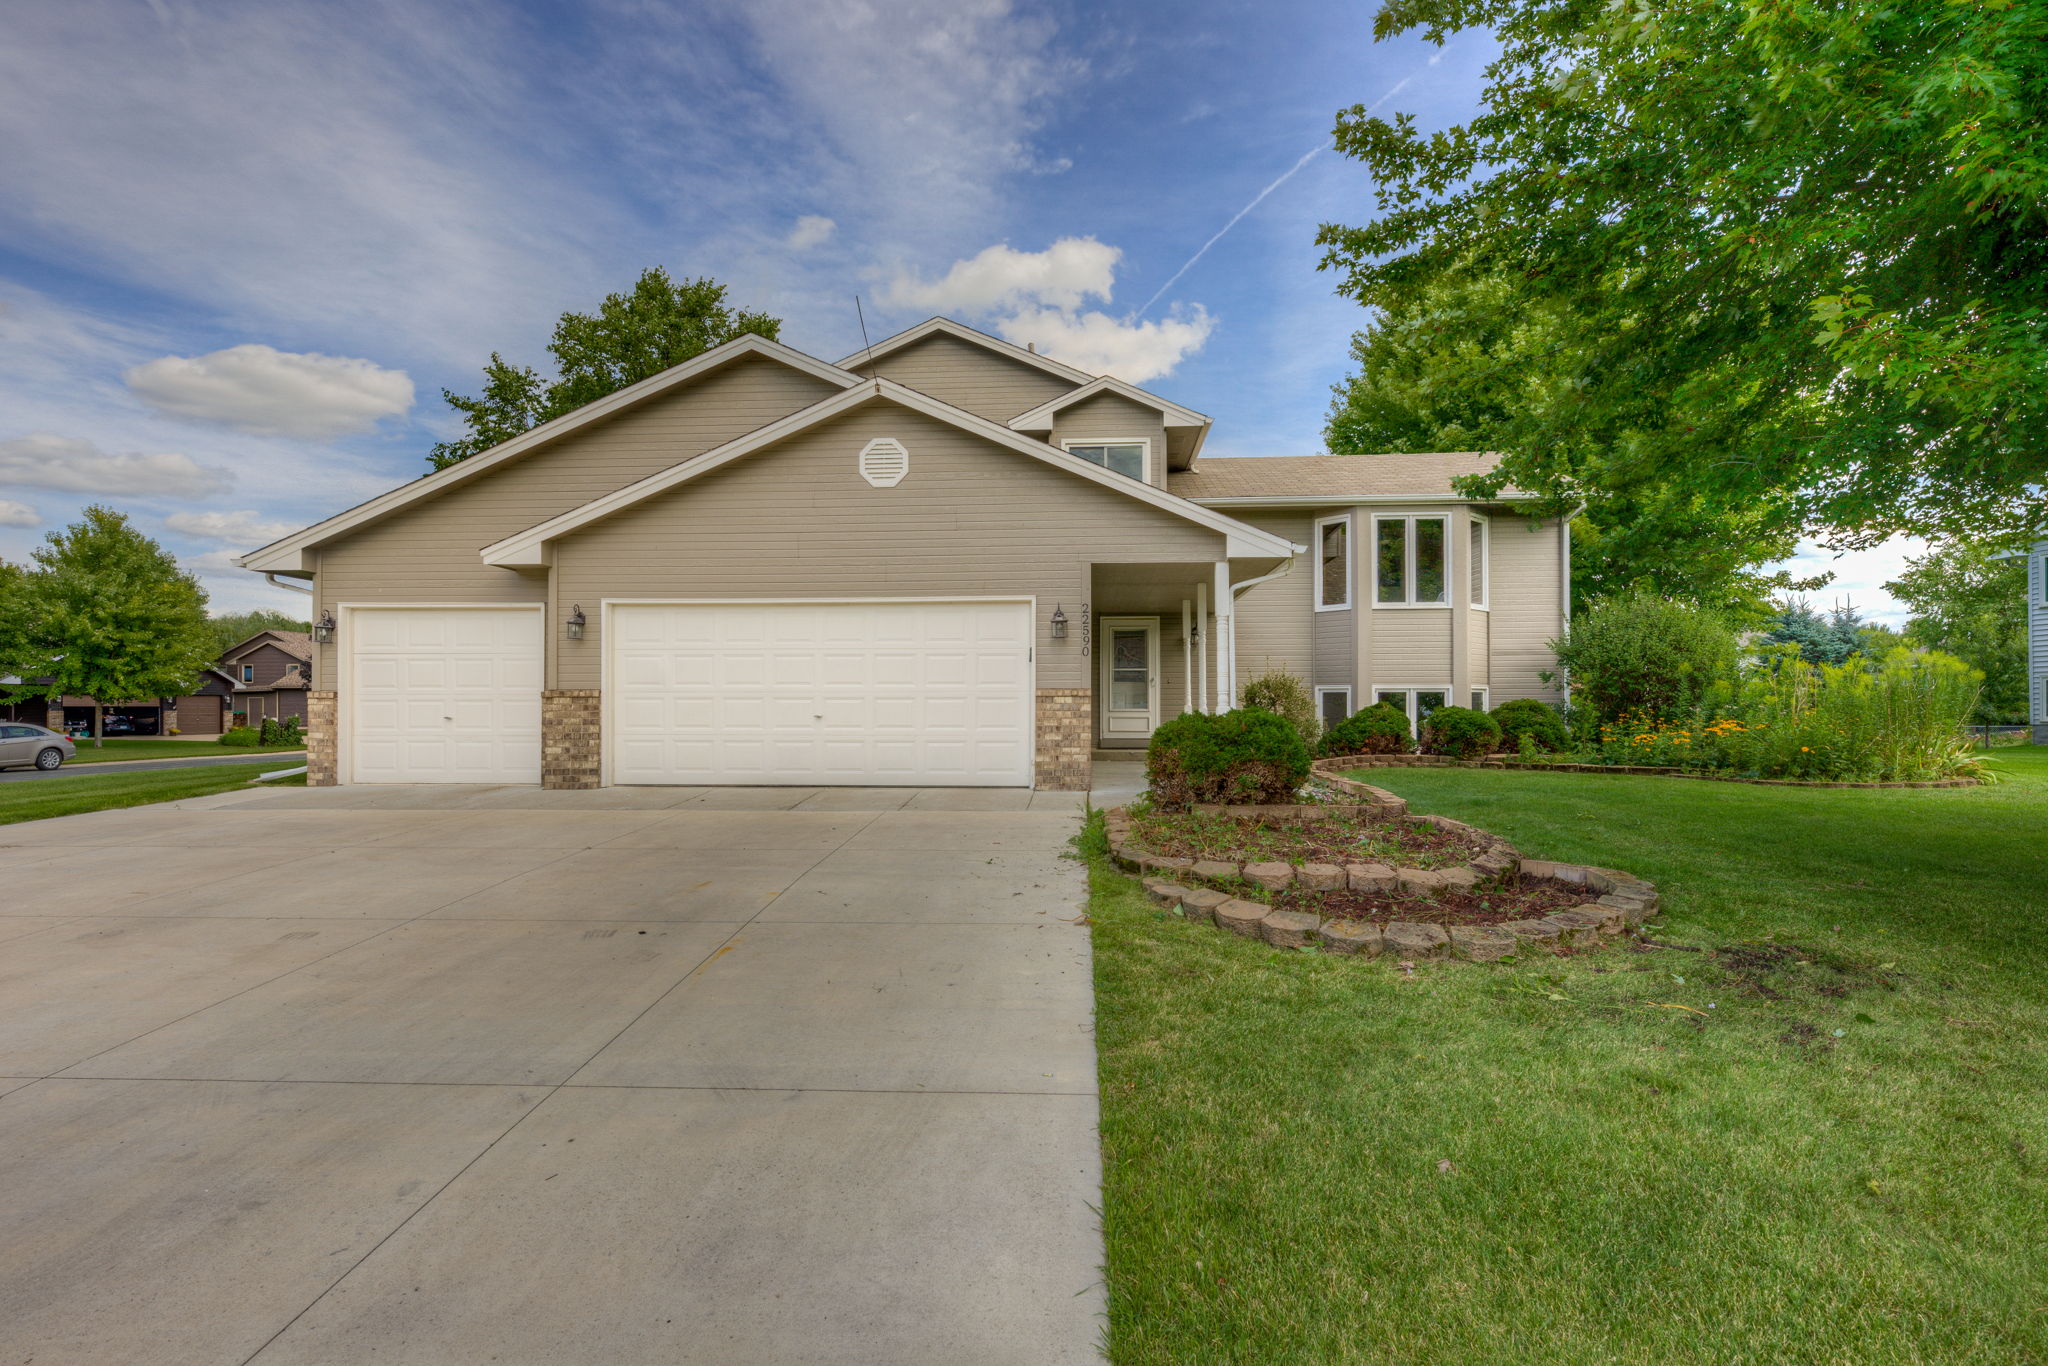  22590 129th Place N, Rogers, MN 55374, US